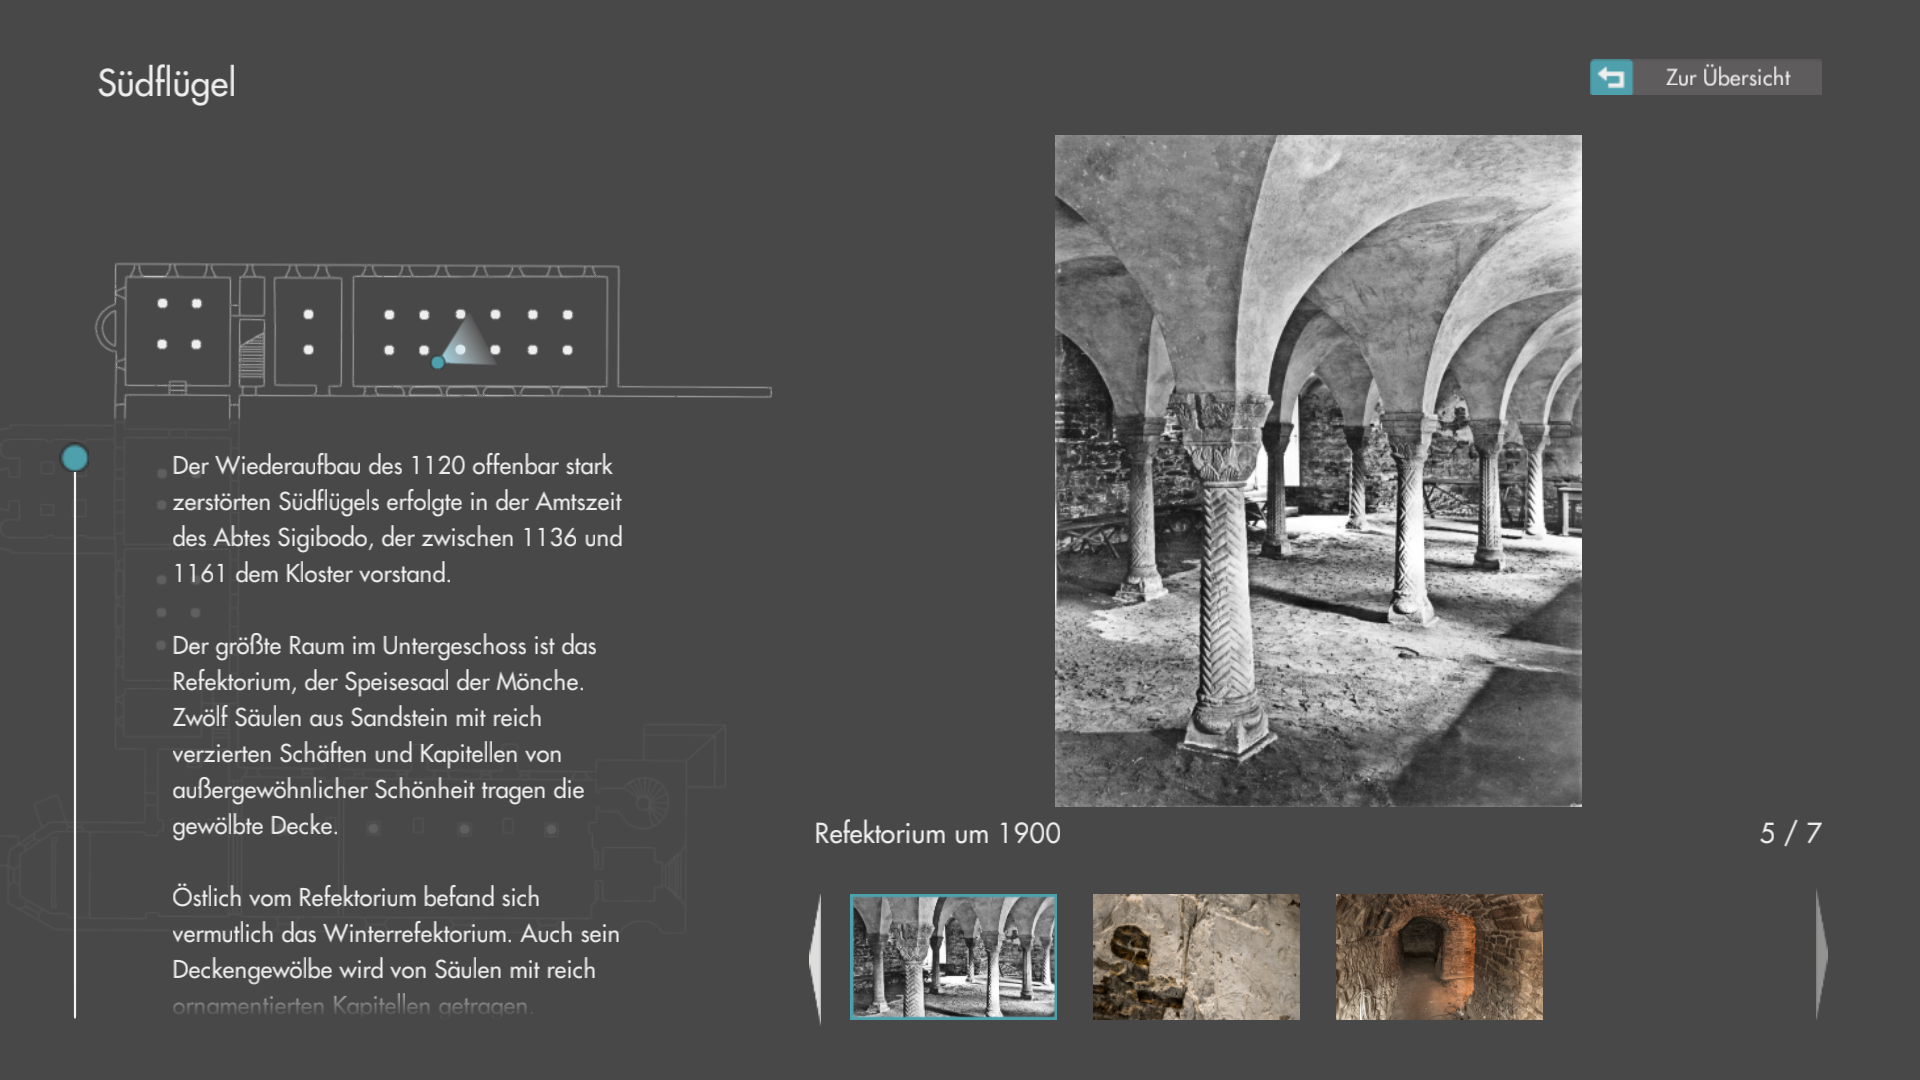 Screenshot of the Ilsenburg Abbey application that shows the image gallery for the 'Südflügel'. The image is on the right side of the screen and shows the refectory around the year 1900. Below is an image slider displaying the thumbnails of several other images. In the upper left corner a map is displayed that shows the position and rotation from where the photograph was taken. Below is a text that is associated with the image.